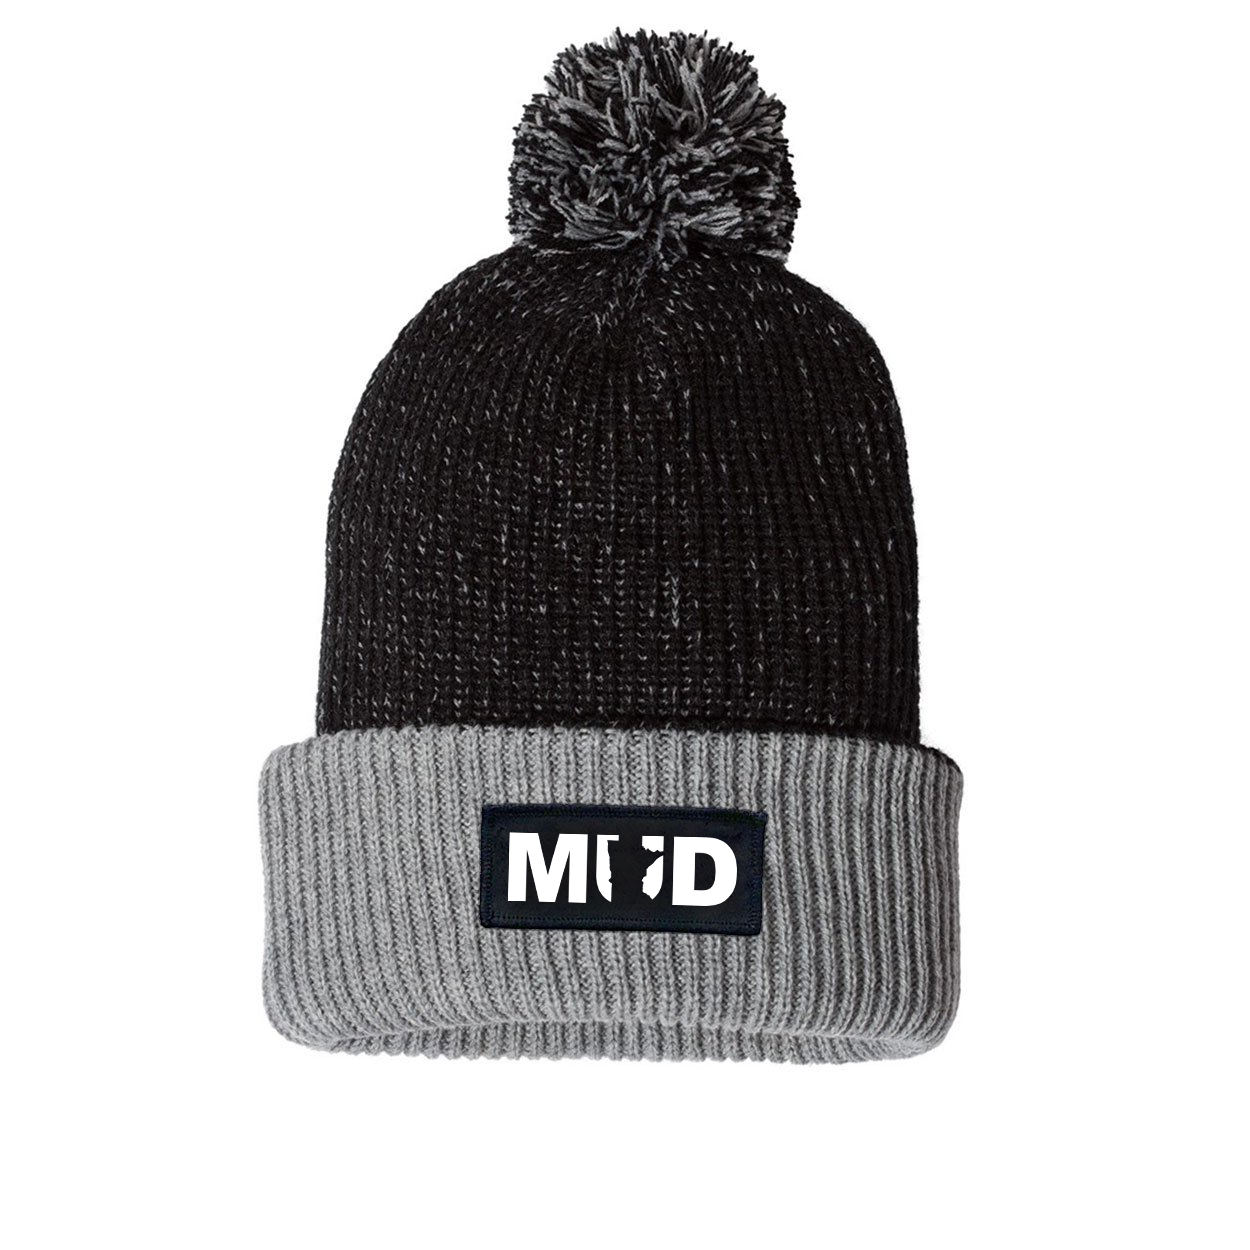 Mud Minnesota Night Out Woven Patch Roll Up Pom Knit Beanie Black/Gray (White Logo)